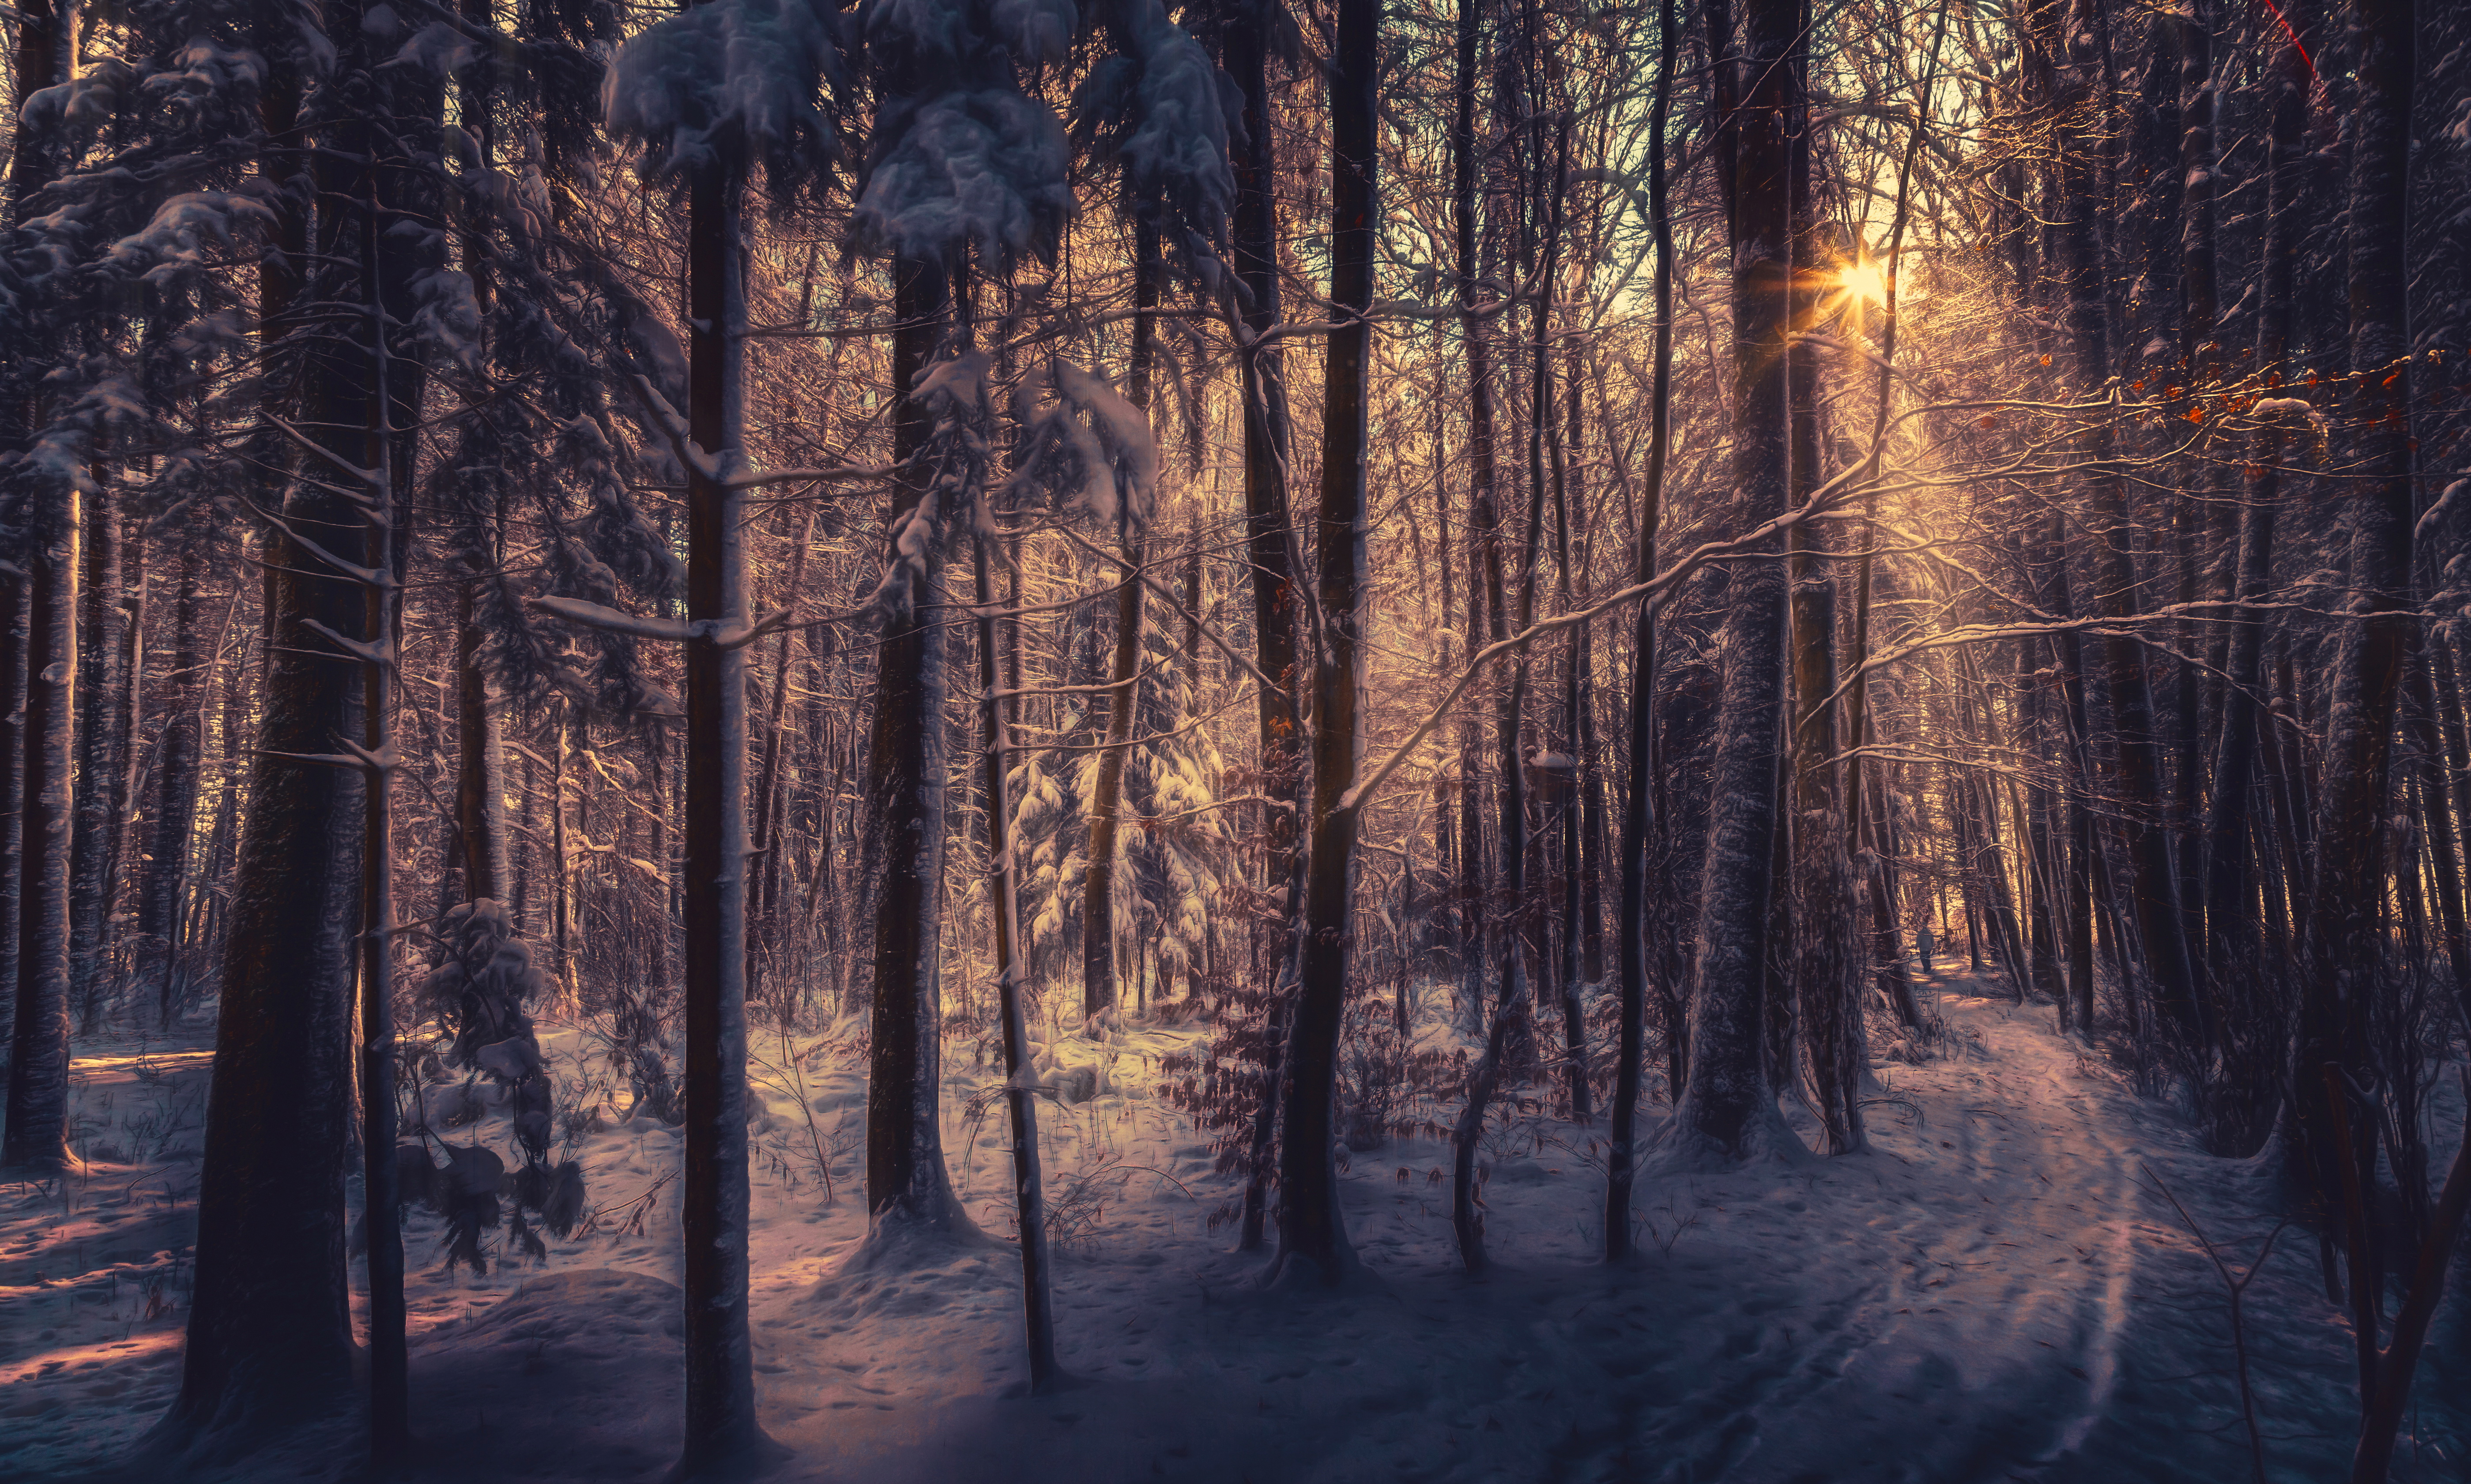 Fairy winter forest / 5598 x 3363 / Forest / Photography | MIRIADNA.COM